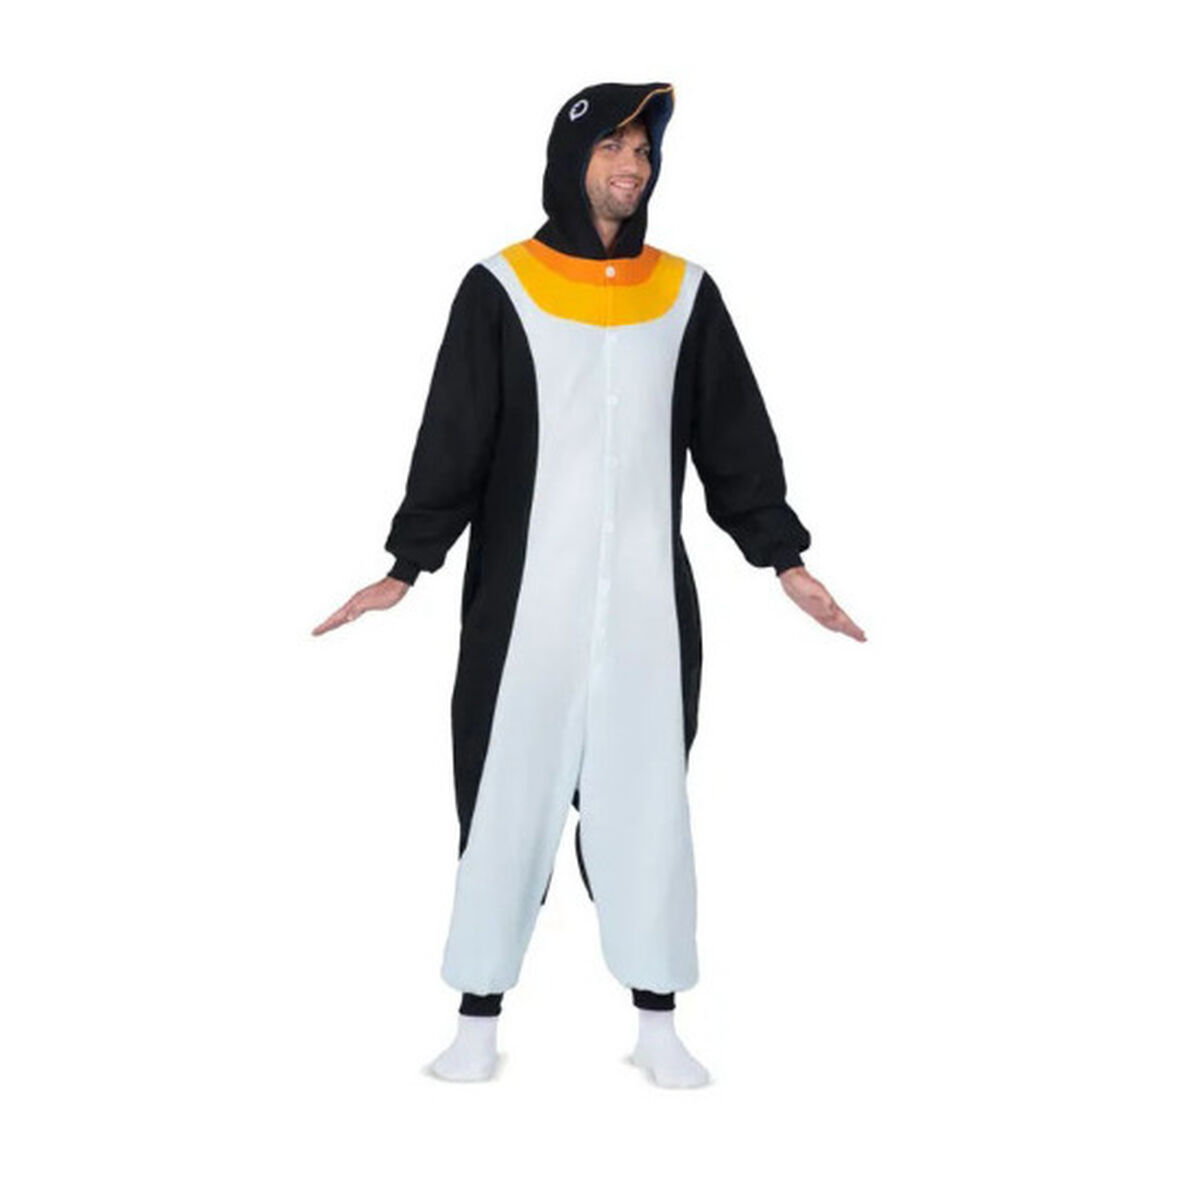 Costume for Adults My Other Me 2 Pieces Penguin Black